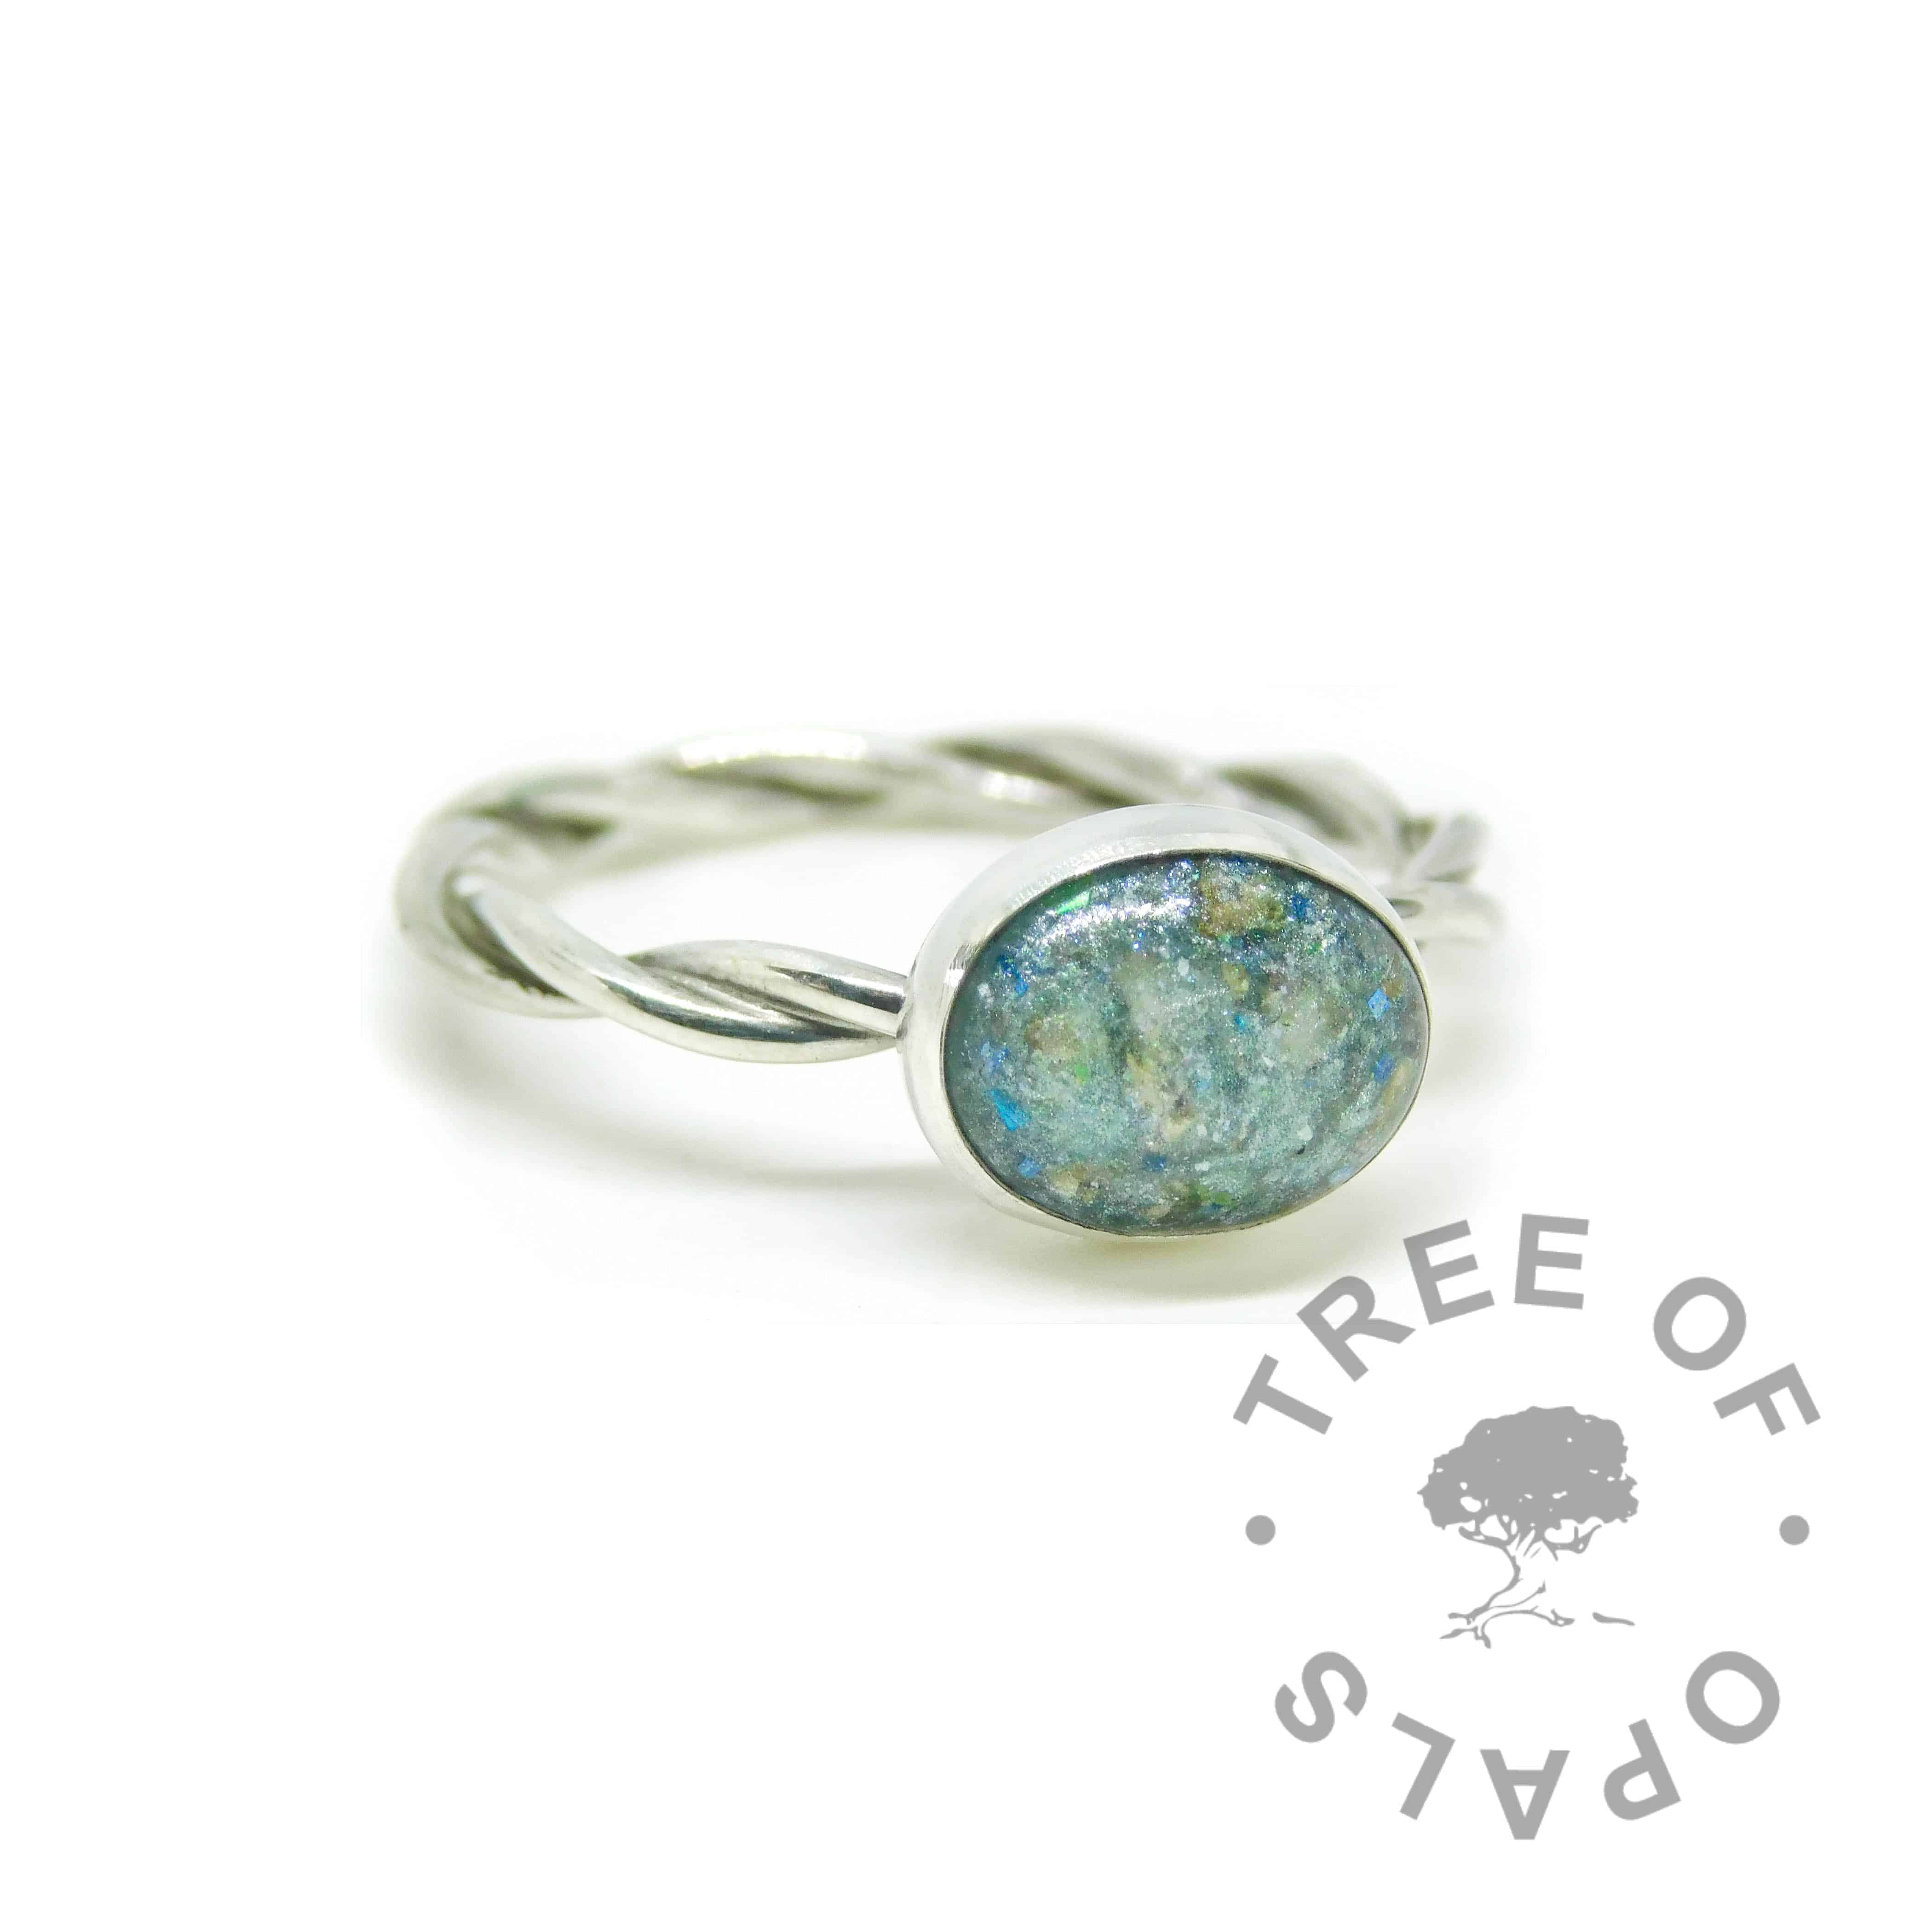 Remade from broken ring by another jeweller. Mermaid teal cremation ash ring on twisted wire band with textured stacking ring (umbilical cord ring). Solid sterling EcoSilver handmade ring. 10x8mm bezel cup rubbed over the cabochon for security.